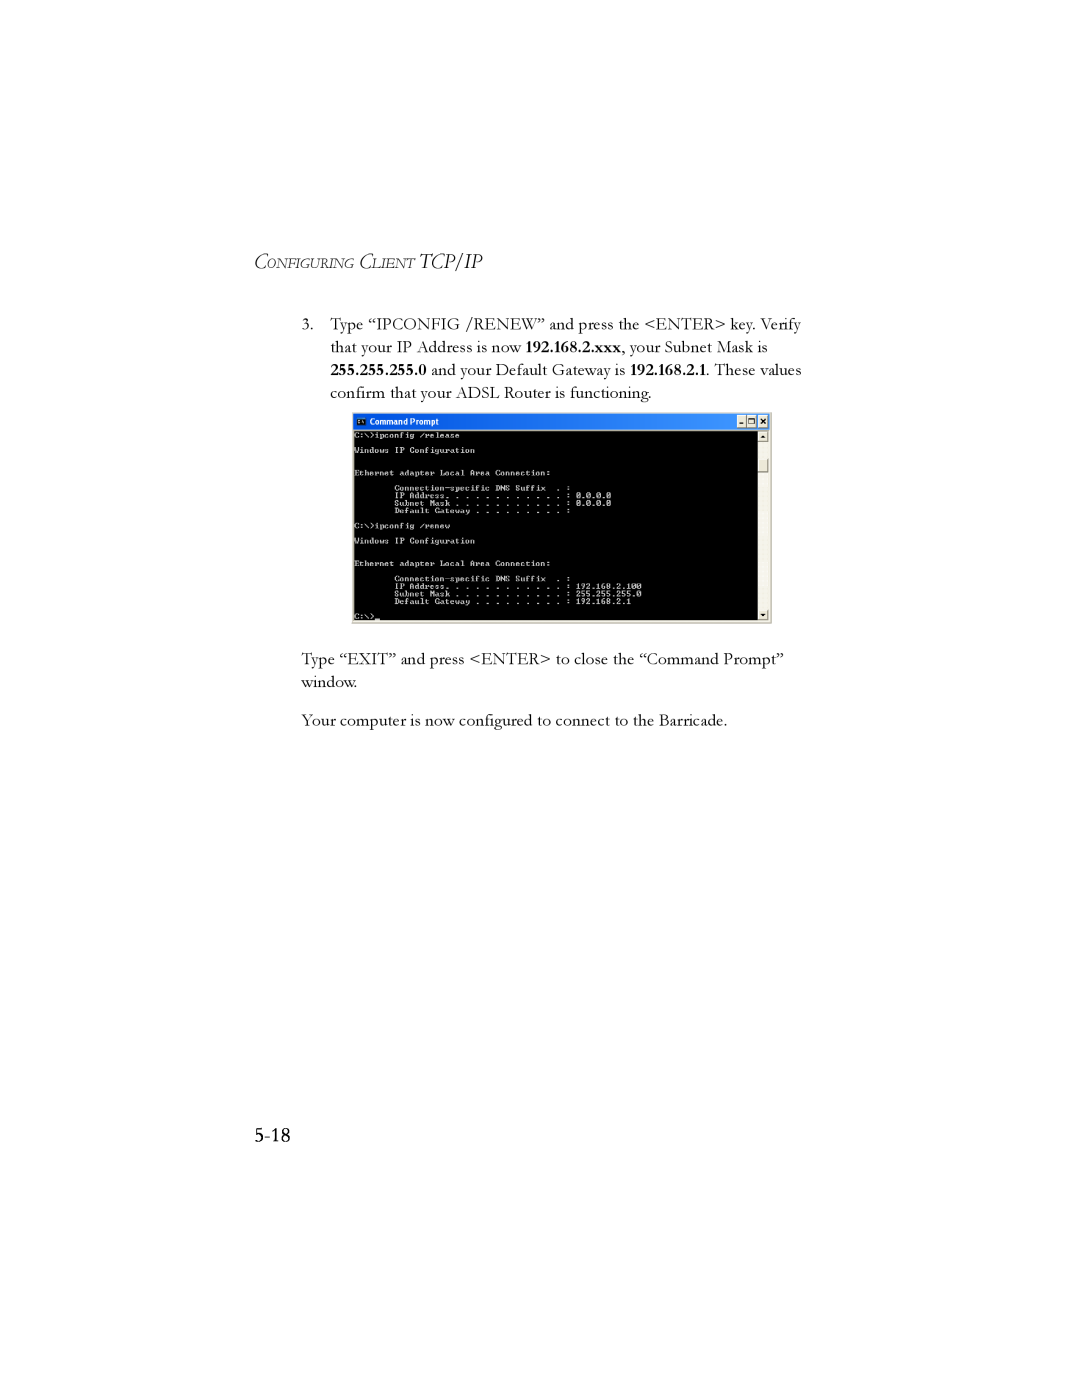 SMC Networks SMC7404BRA EU manual 5-18, Type “EXIT” and press ENTER to close the “Command Prompt” window 